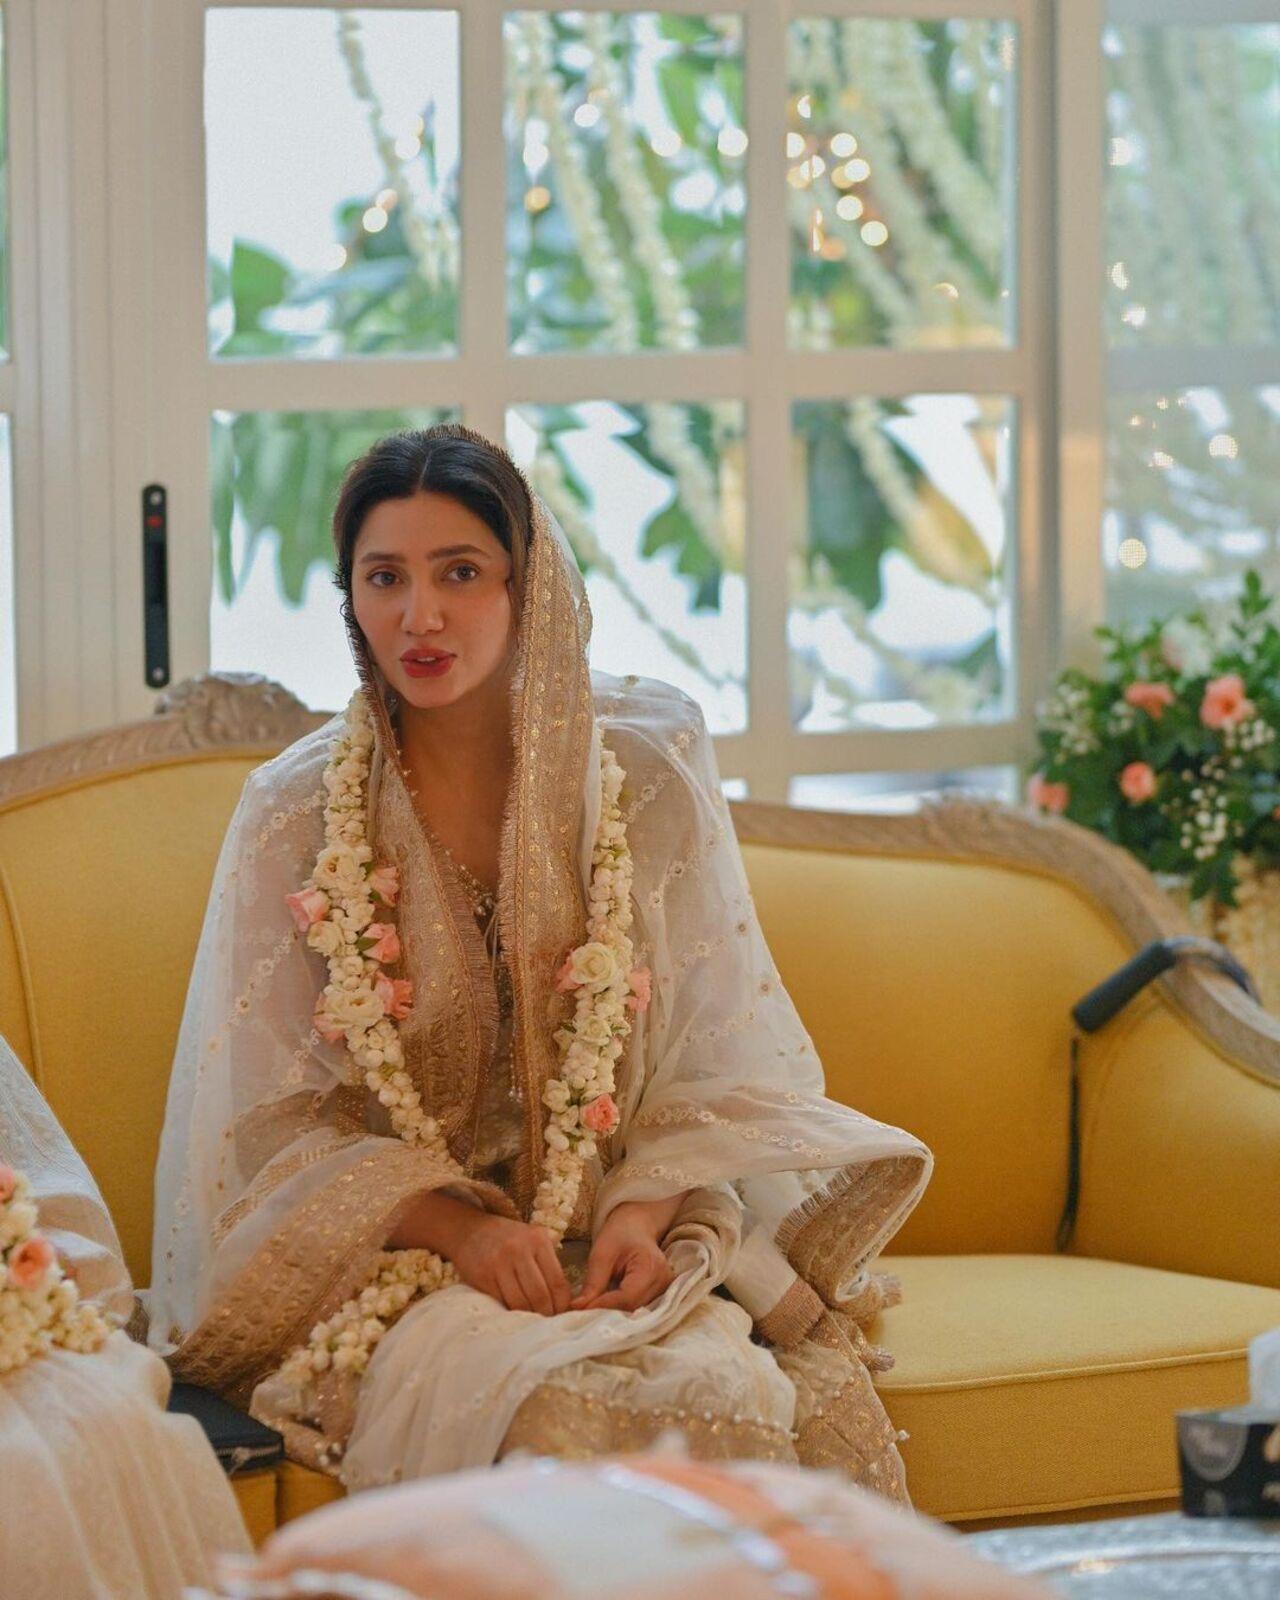 After her wedding pictures, Mahira shared wonderful pictures from her mayun ceremony hosted by her friends. She shared pictures of herself a white suit with her mayun outfit hanging beside her